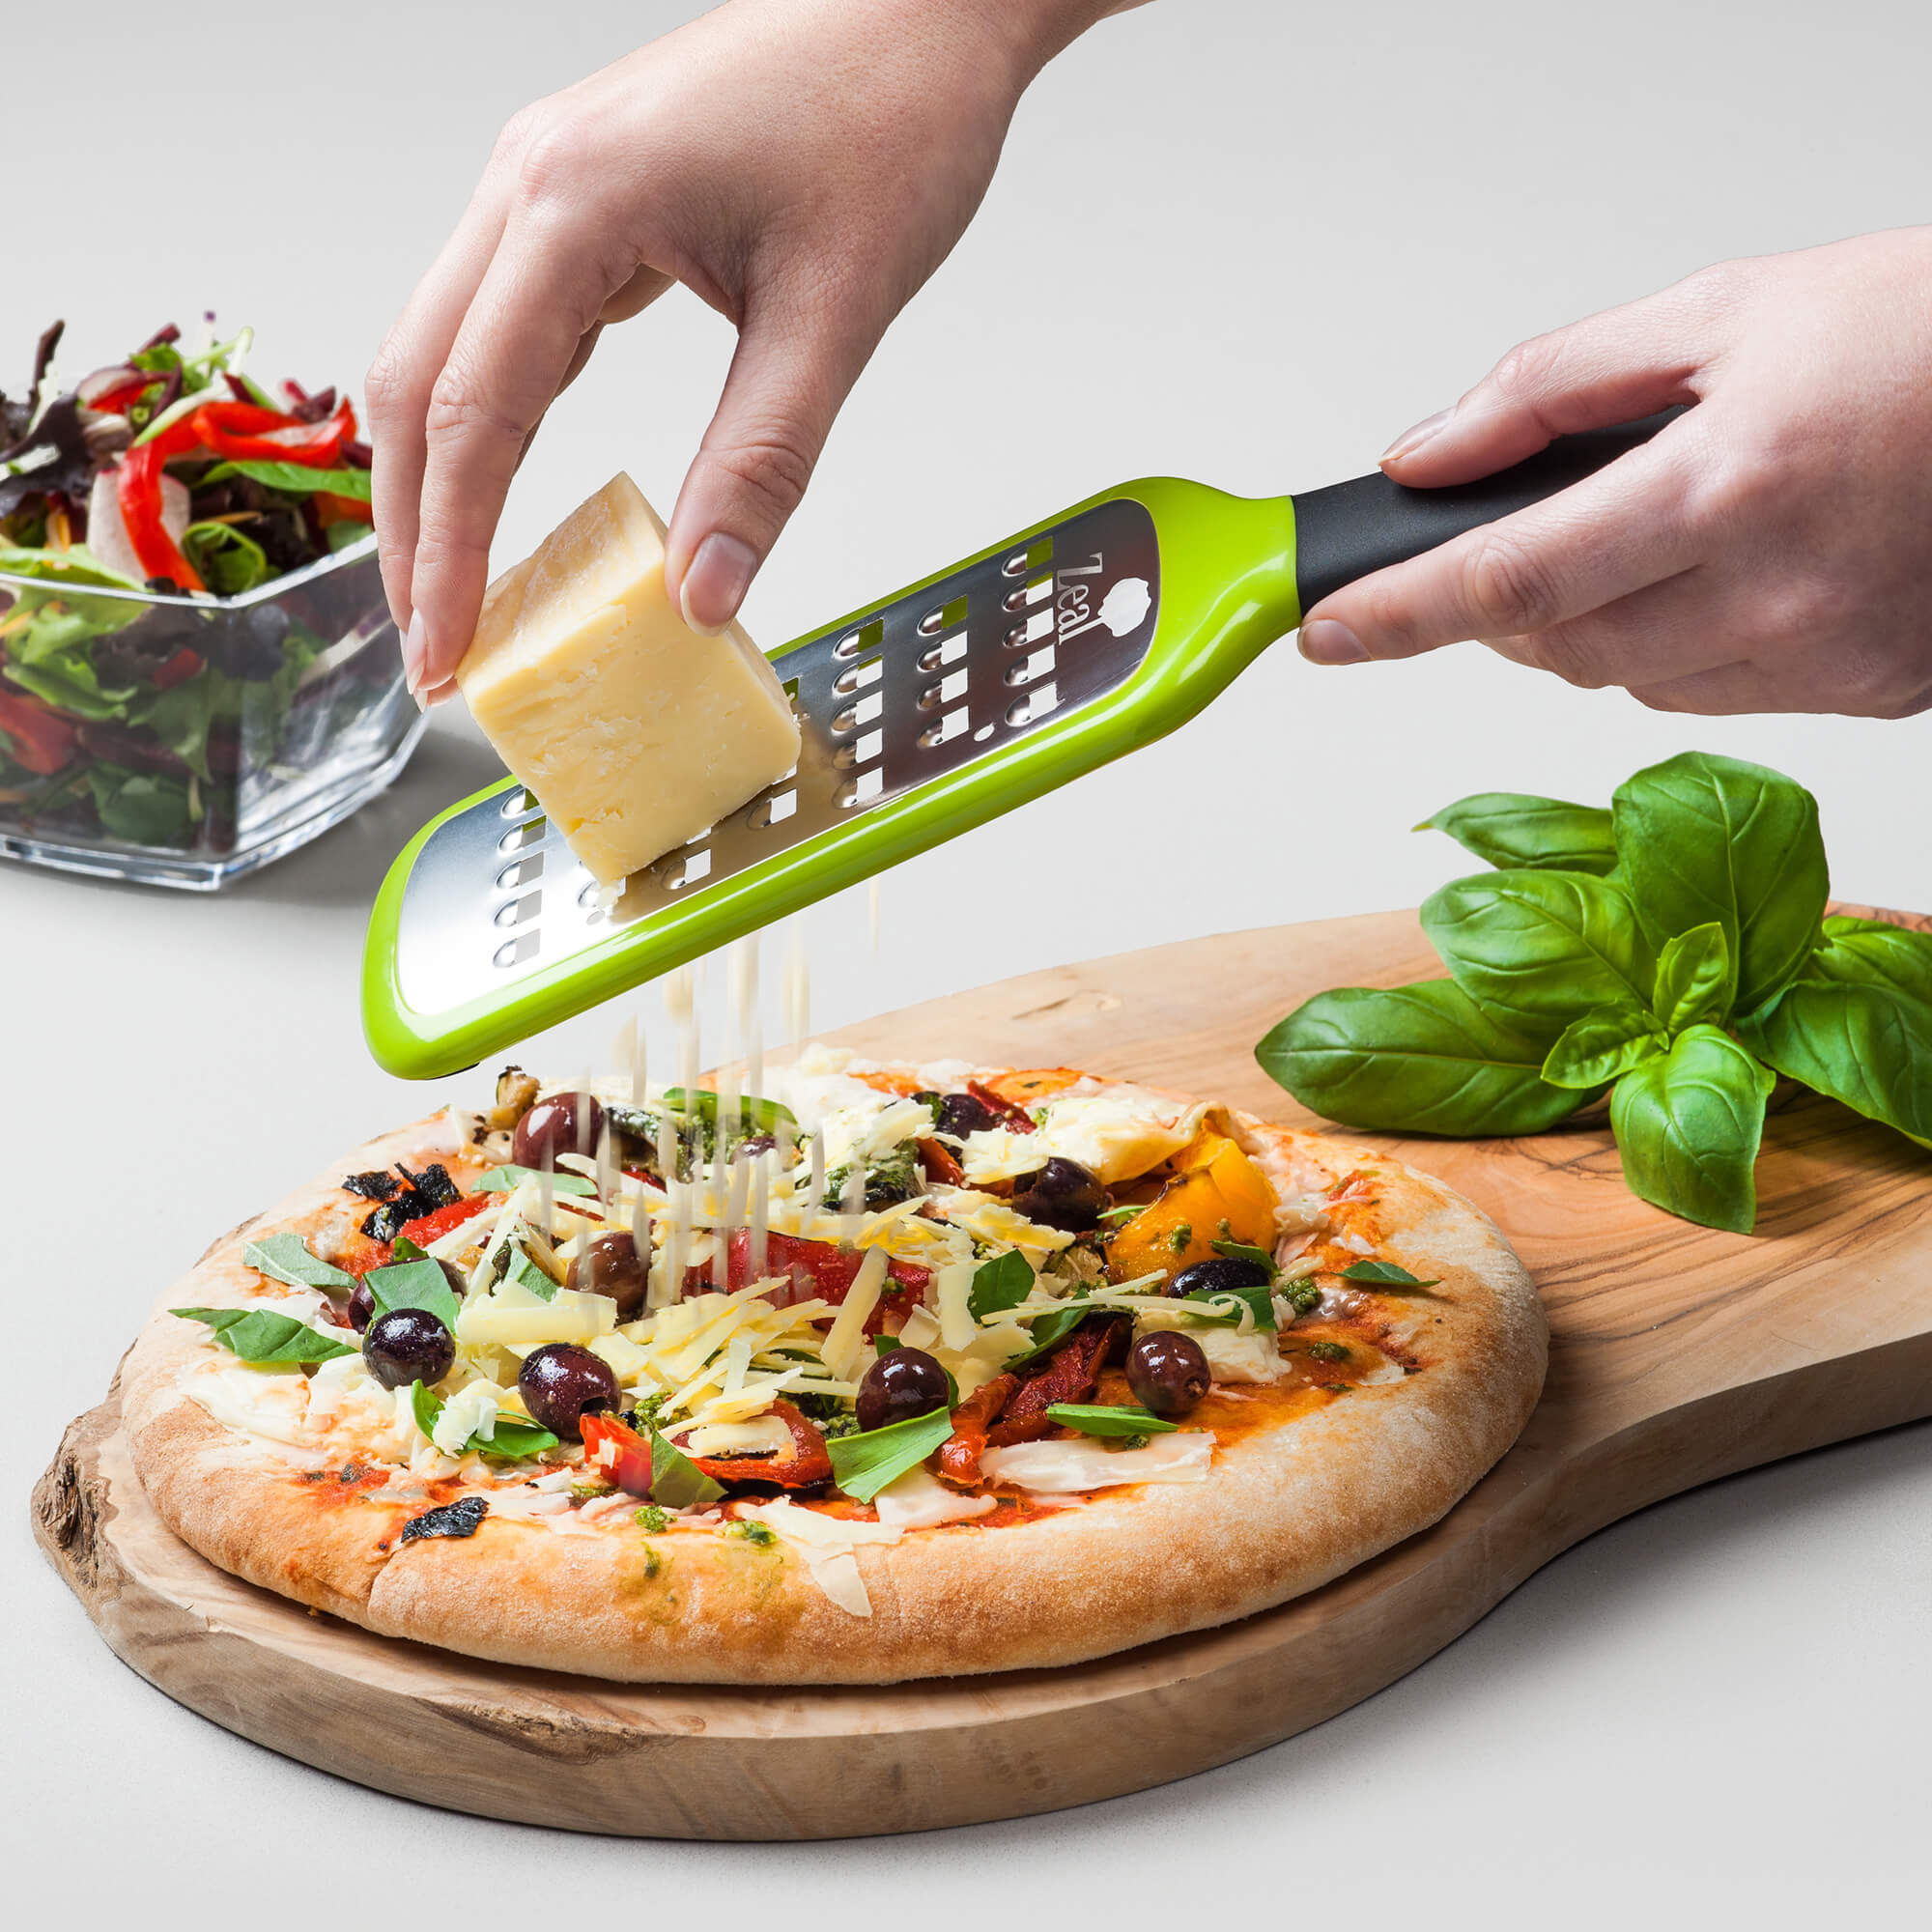 Hard cheese being grated over a pizza using a Zeal Coarse Grater